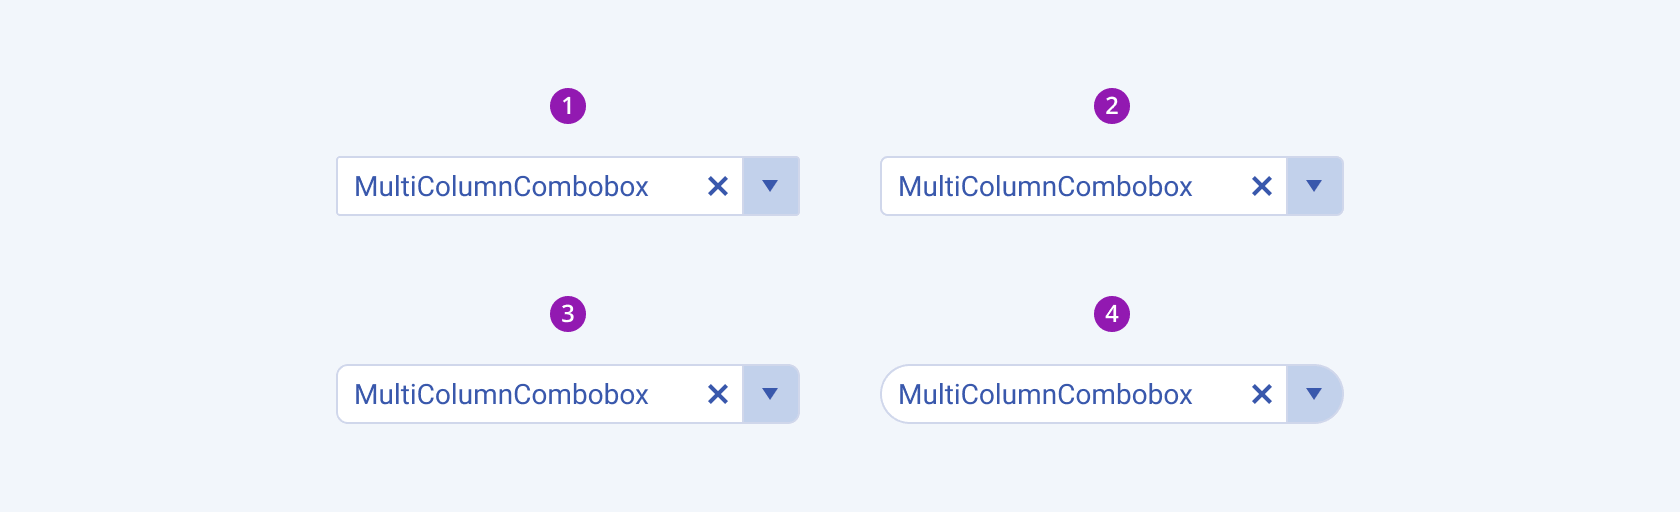 Four Telerik and Kendo UI MultiColumnComboBox components demonstrating the small, medium, large, and full rounded options respectively.